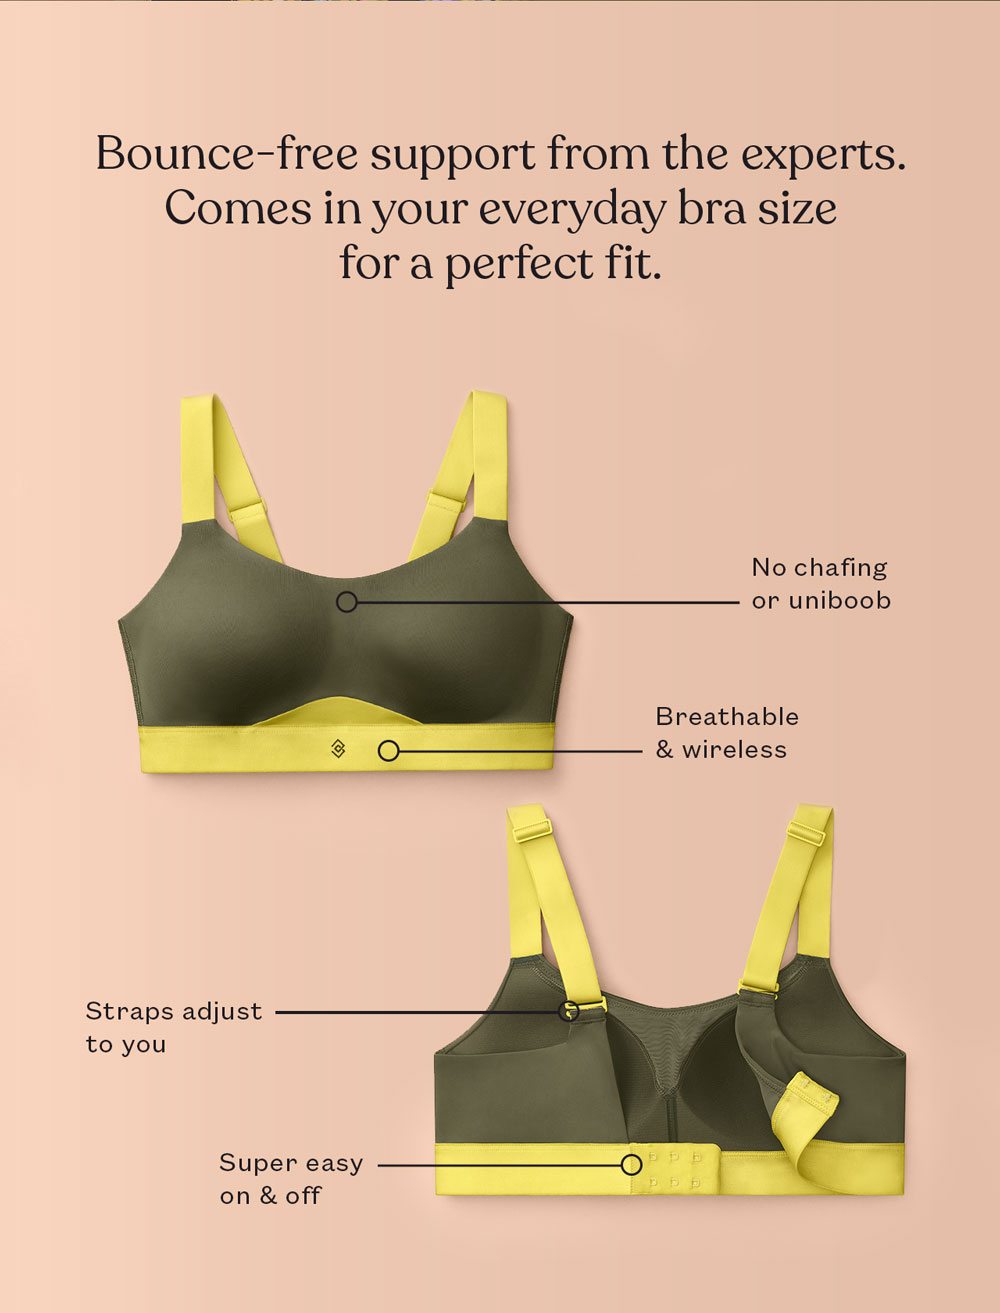 Bounce-free support from the experts. Comes in your everyday bra size for a perfect fit.